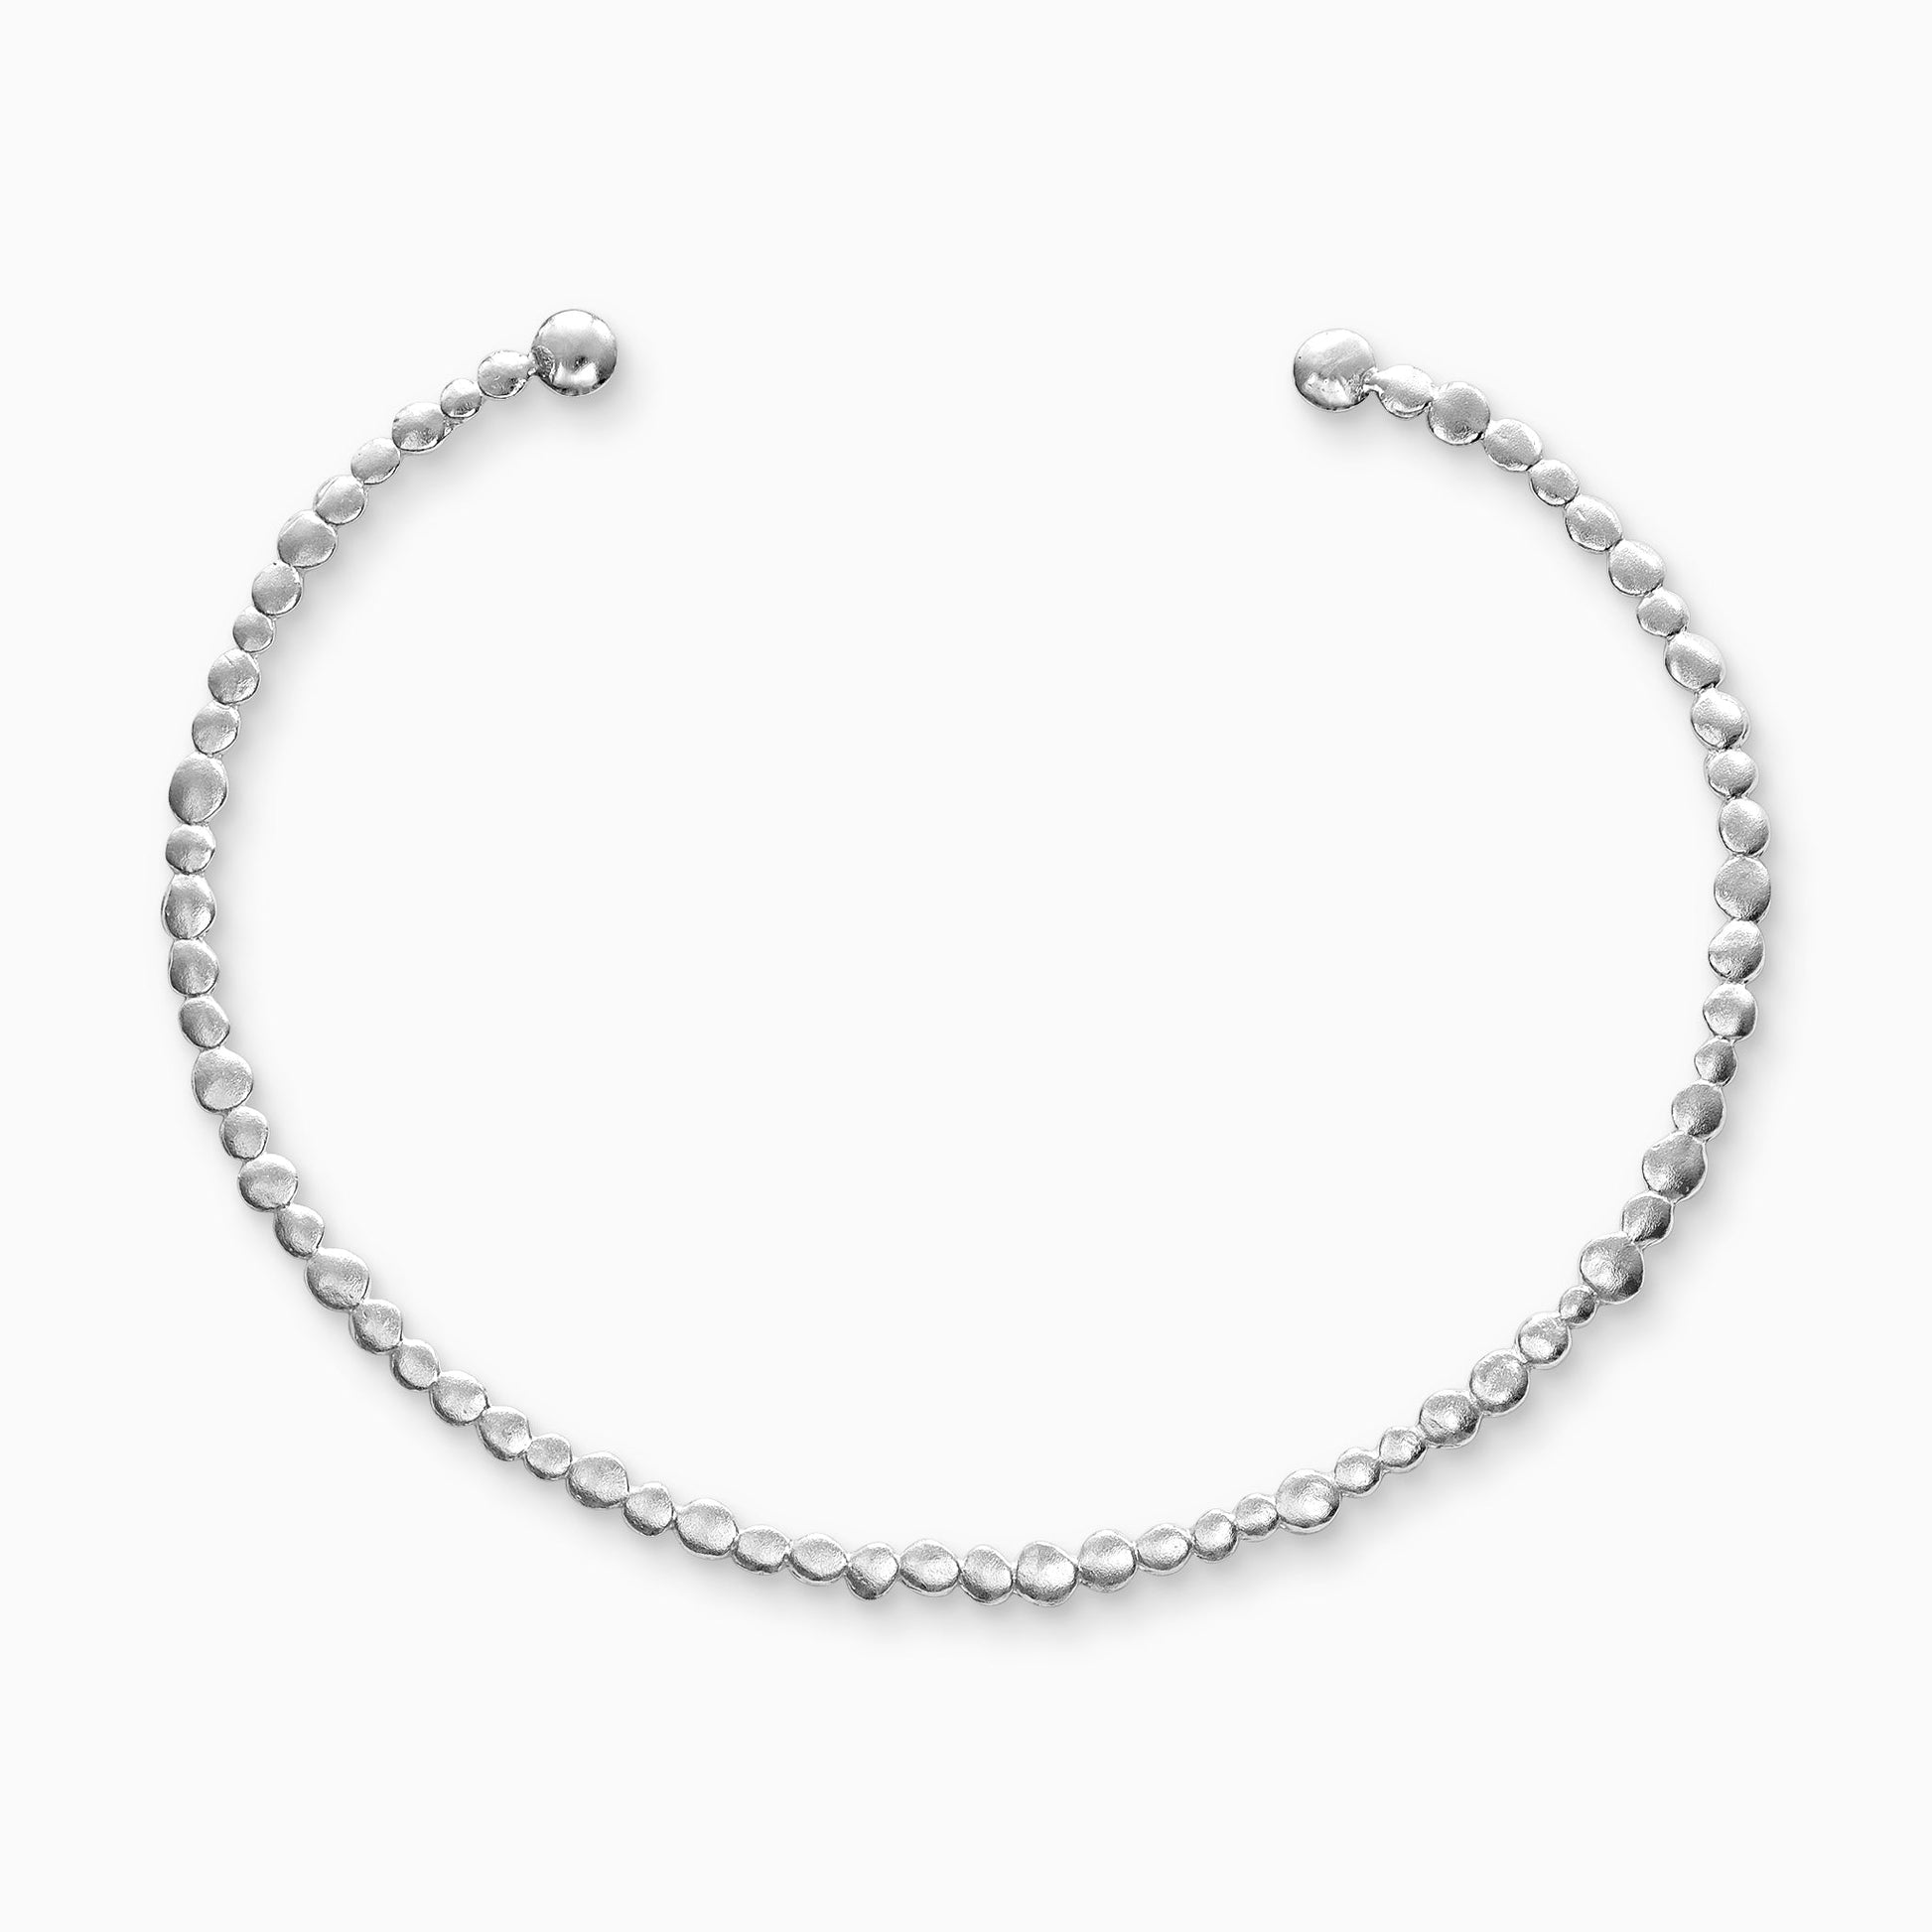 Recycled Silver collar. A line of dainty textured dots of silver in varying sizes from a collar worn close to the neck. Open ended to enable taking on and off. 125mm x 100mm